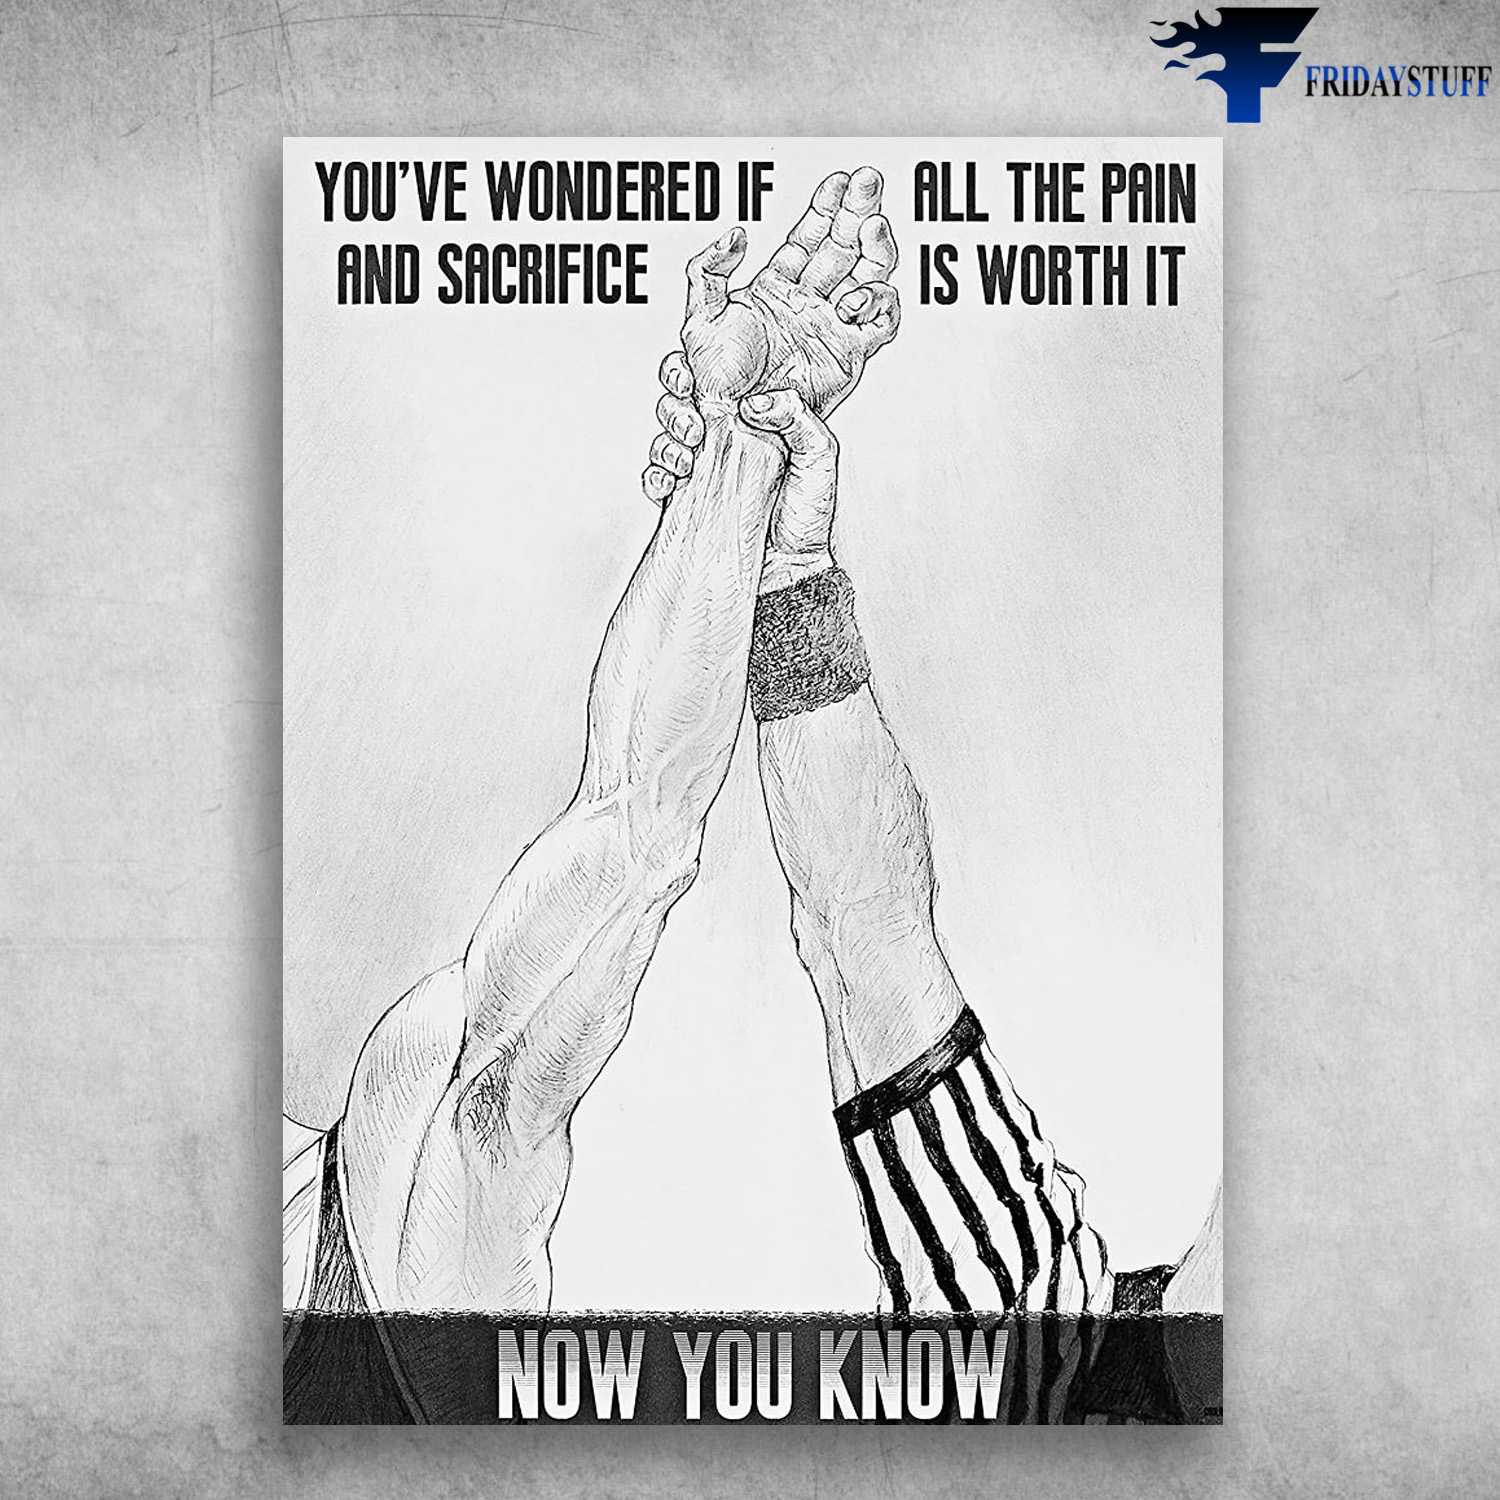 Wrestling Poster, Wrestling Lover, You've Wondered If And Sacrifice, All The Pain Is Worth It, Now You Know